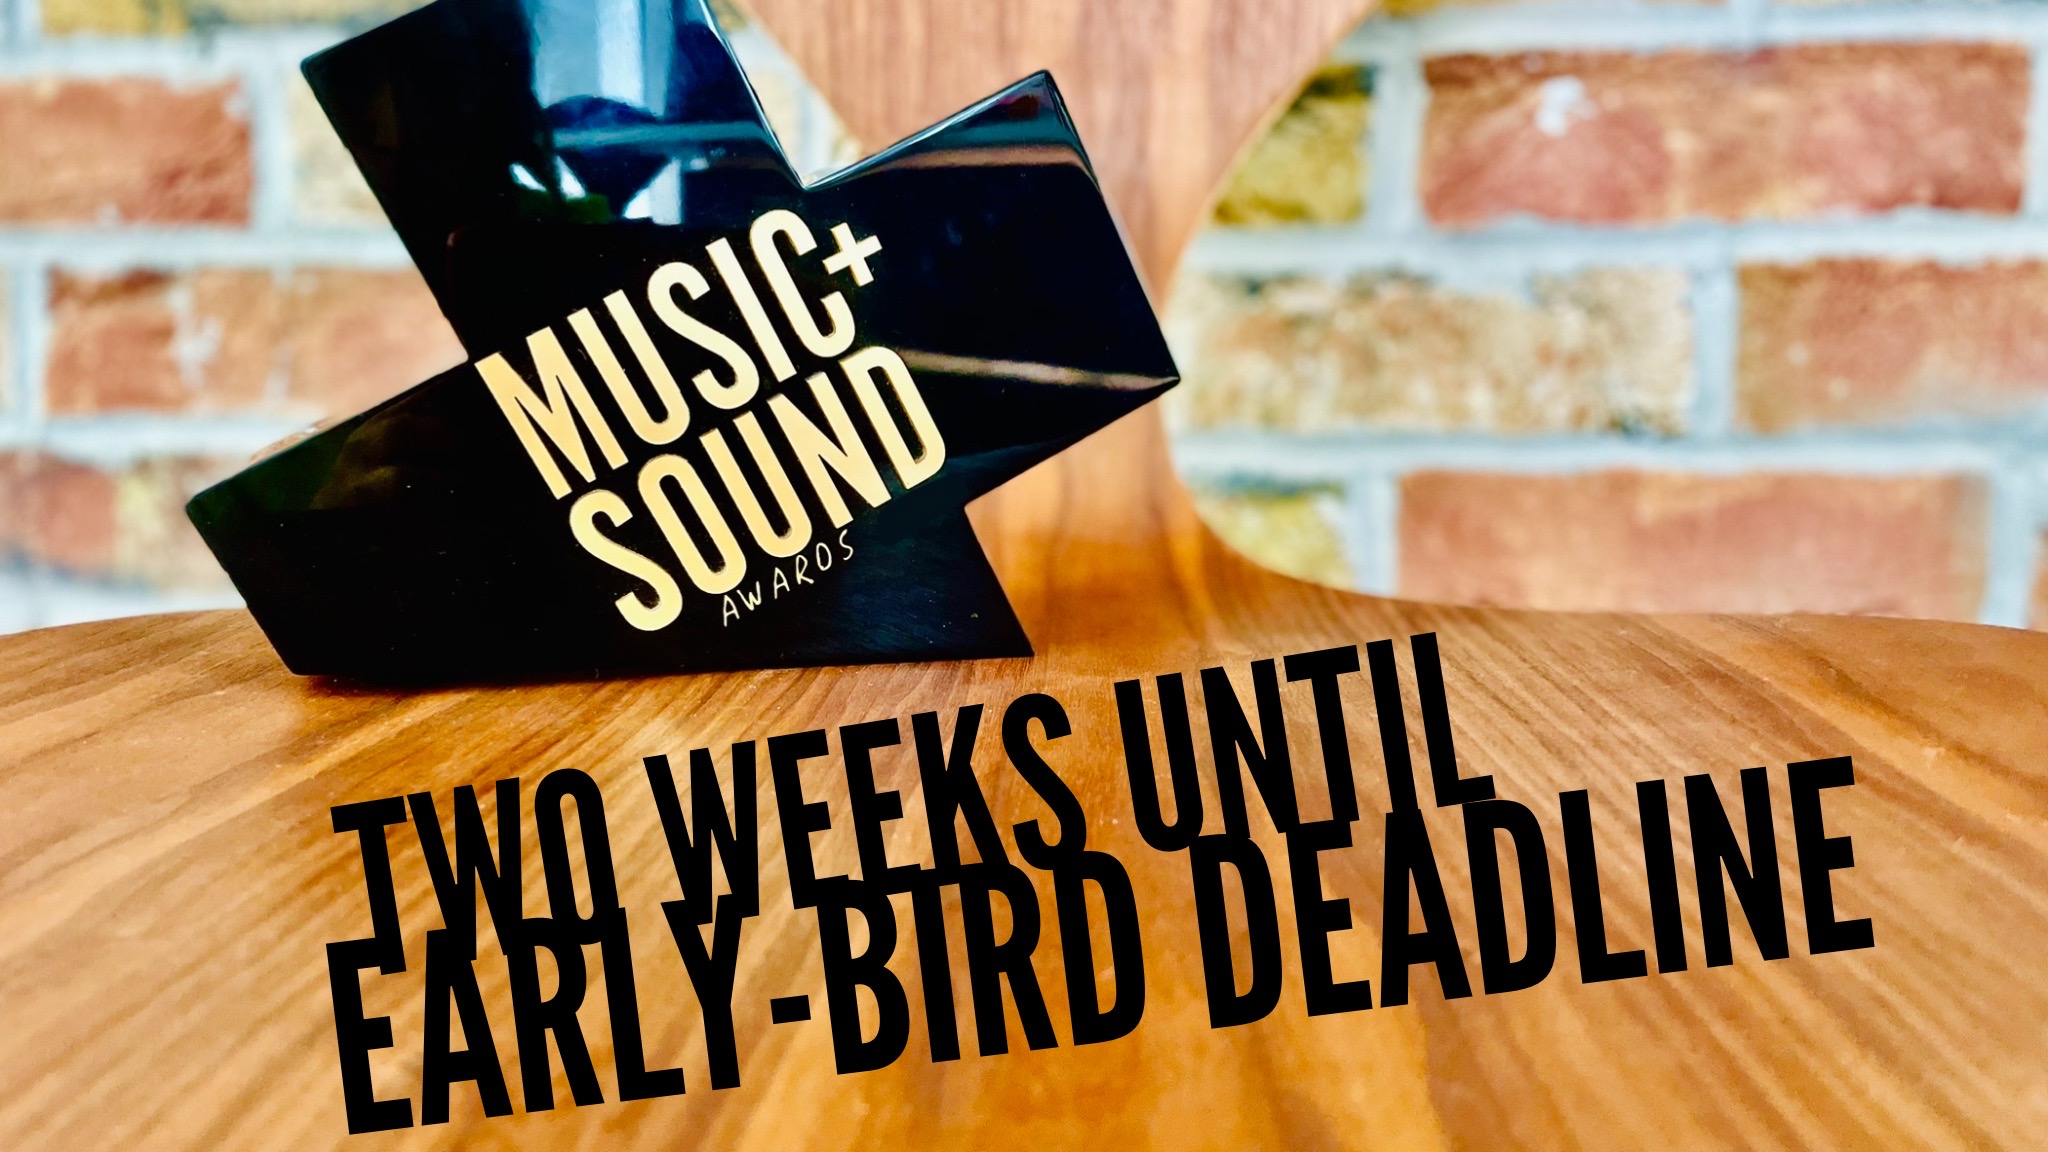 Music+Sound Awards Early-Bird Entry Deadline is Two Weeks Away